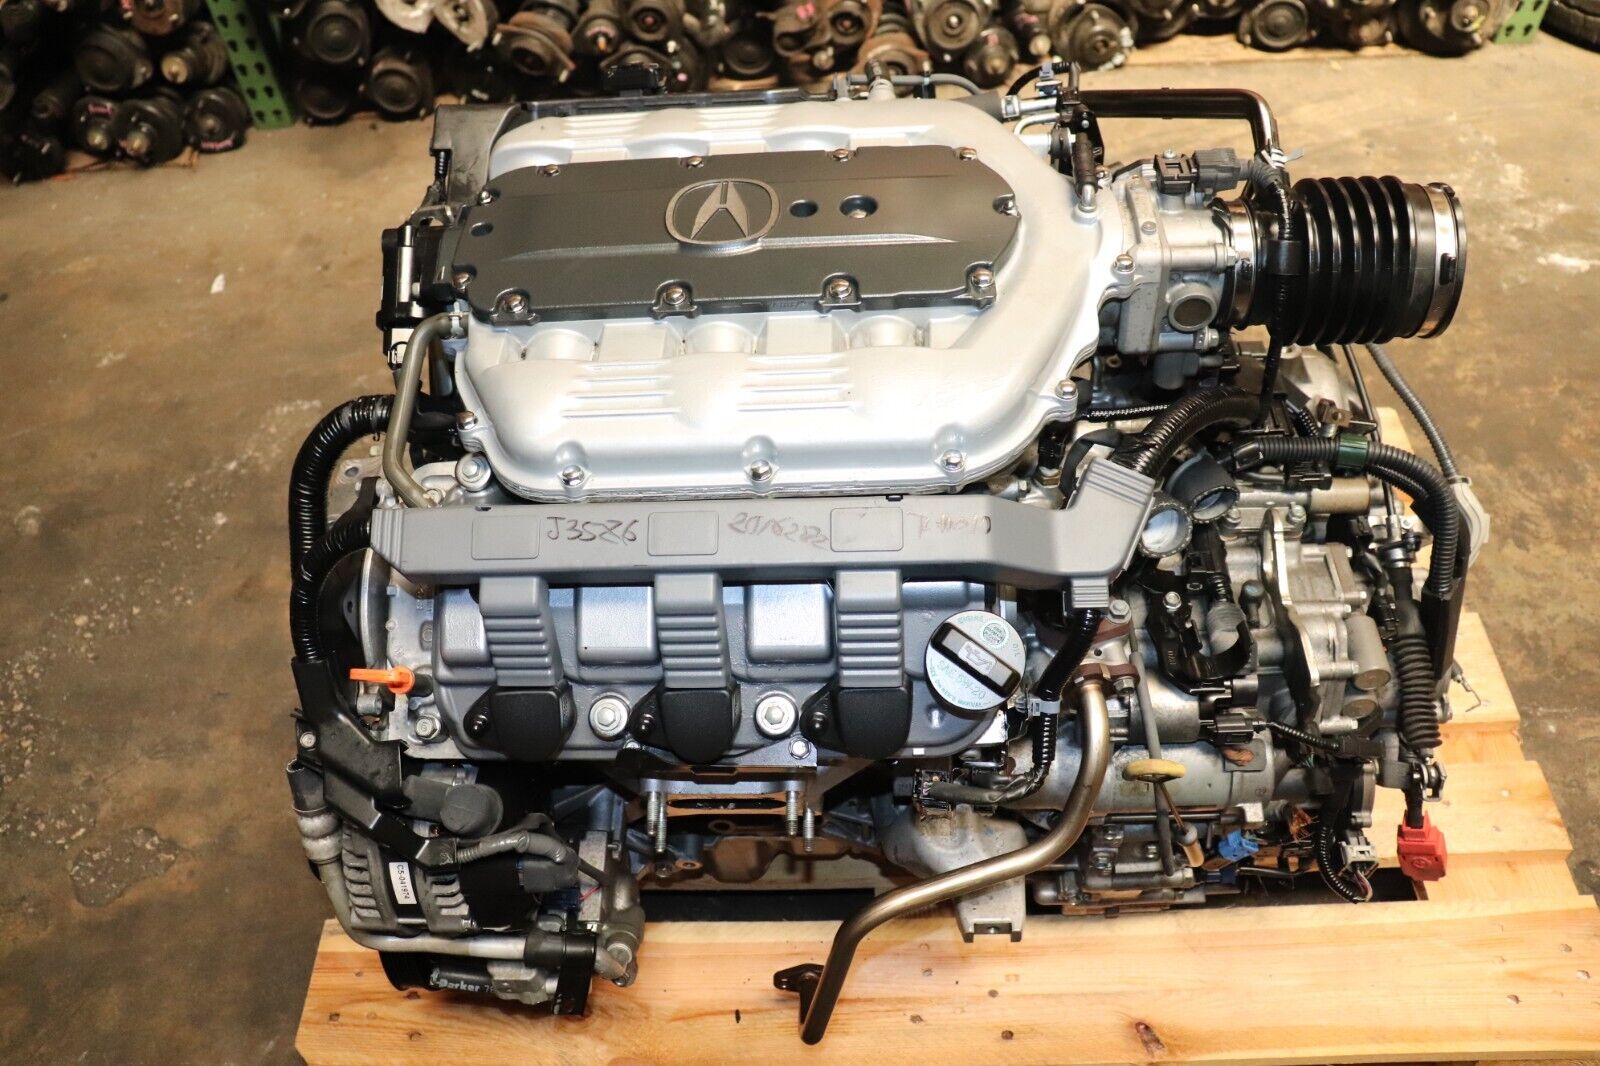 Acura TL 3.7L V6 engines 2010 to 2014